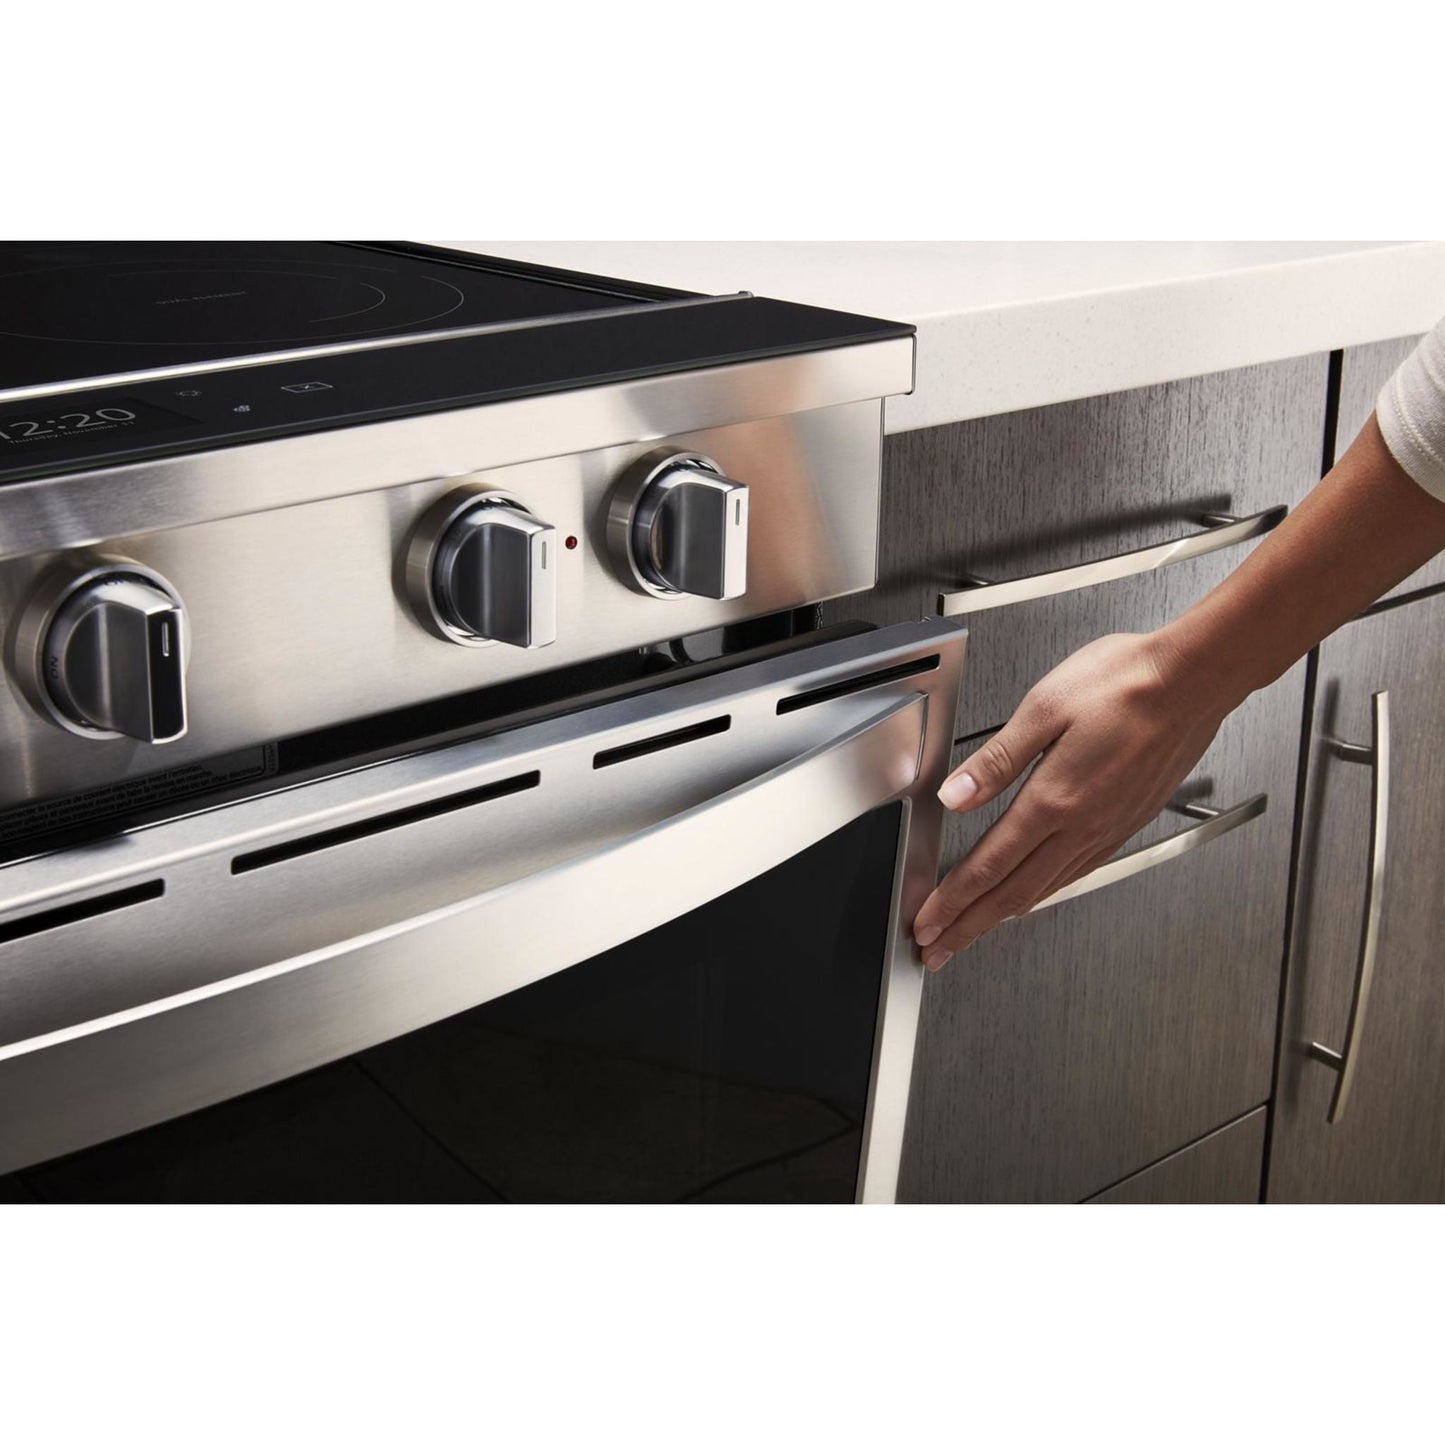 Whirlpool Front Control Range (YWEE750H0HZ) - Stainless Steel